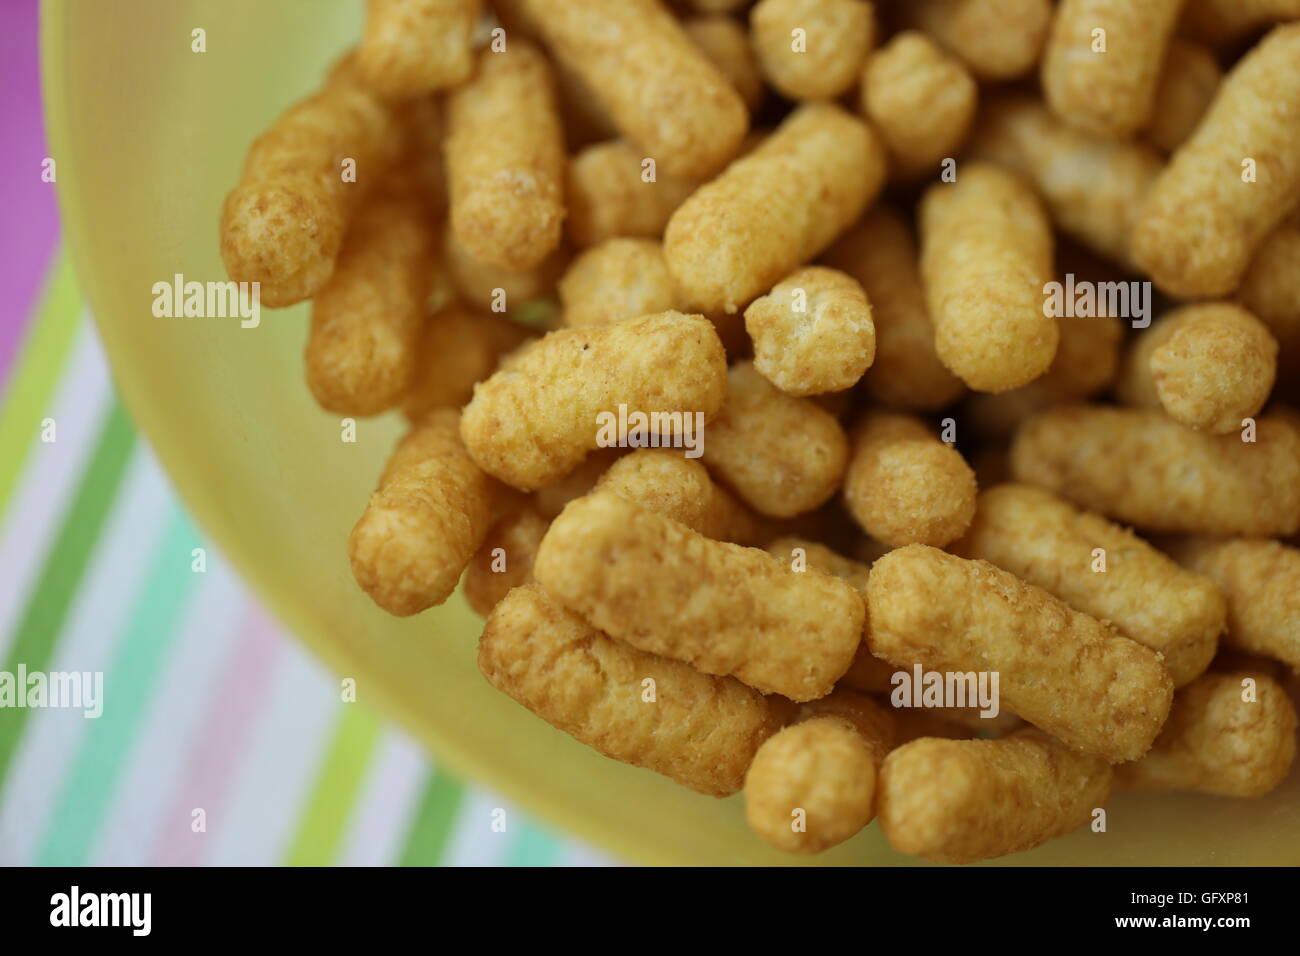 Bamba, Israeli Peanut Snack.  Stack of natural salty snack made of peanuts for toddlers and children, in a yellow plastic bowl. Party snack, in the ba Stock Photo